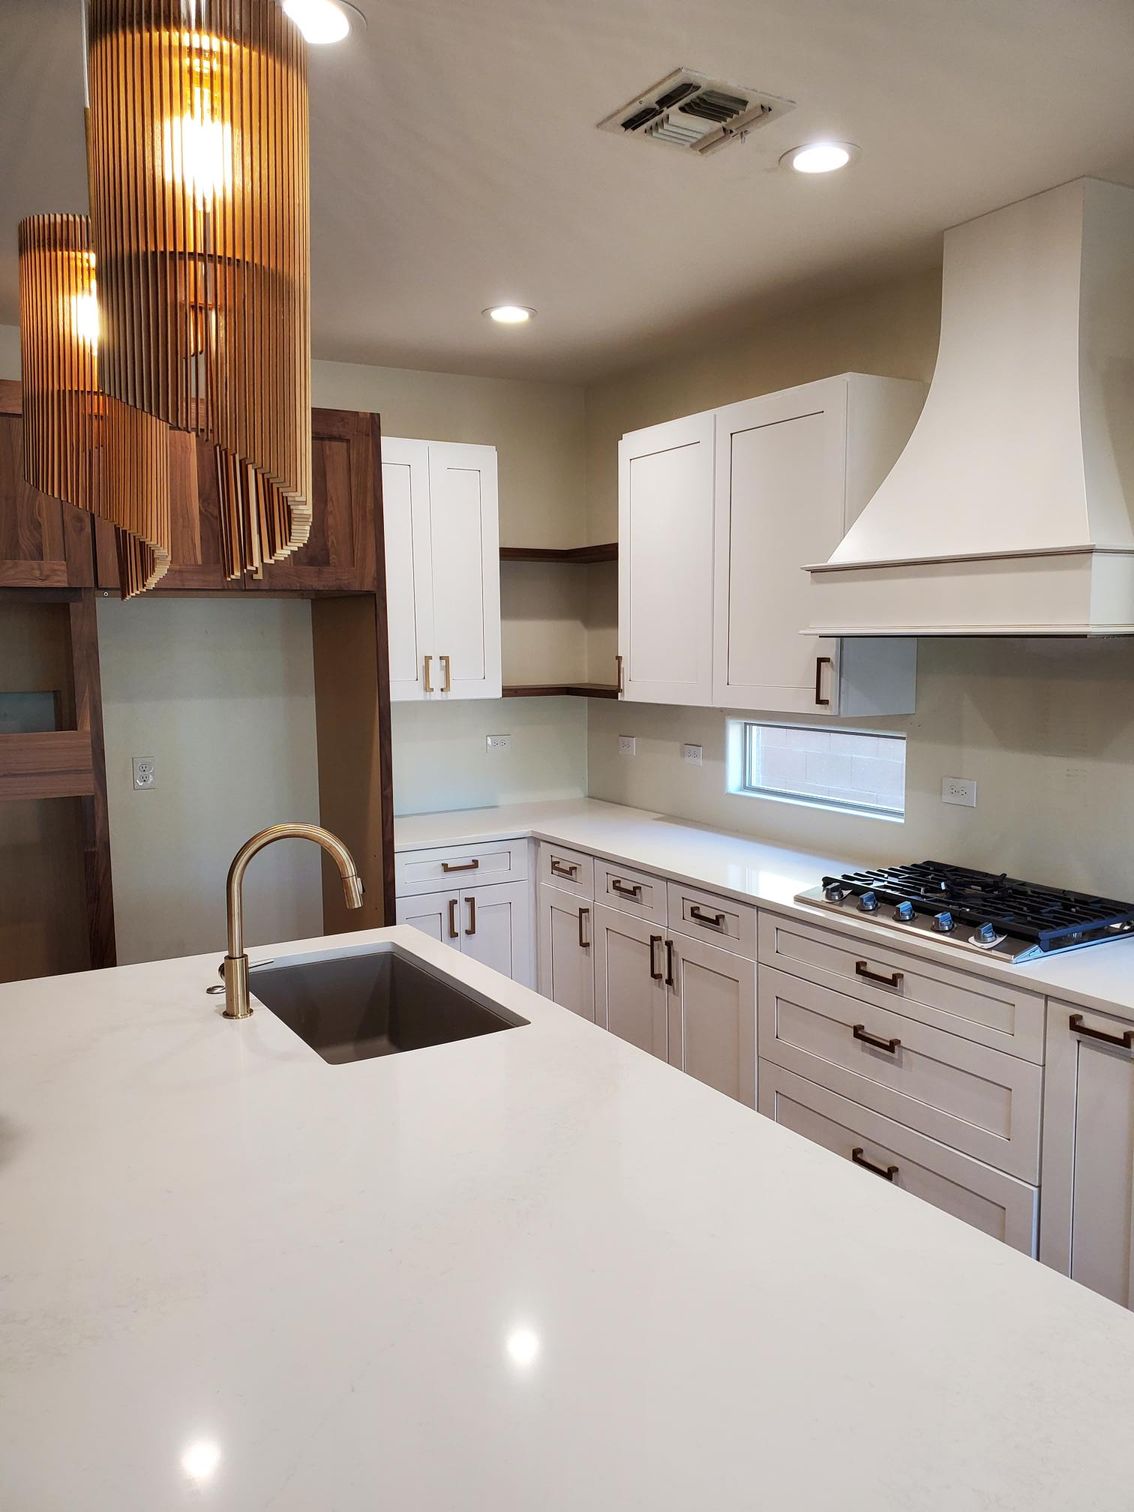 Modern kitchen remodel featuring white shaker cabinets, waterfall quartz countertops with soft veining, and stainless steel appliances.